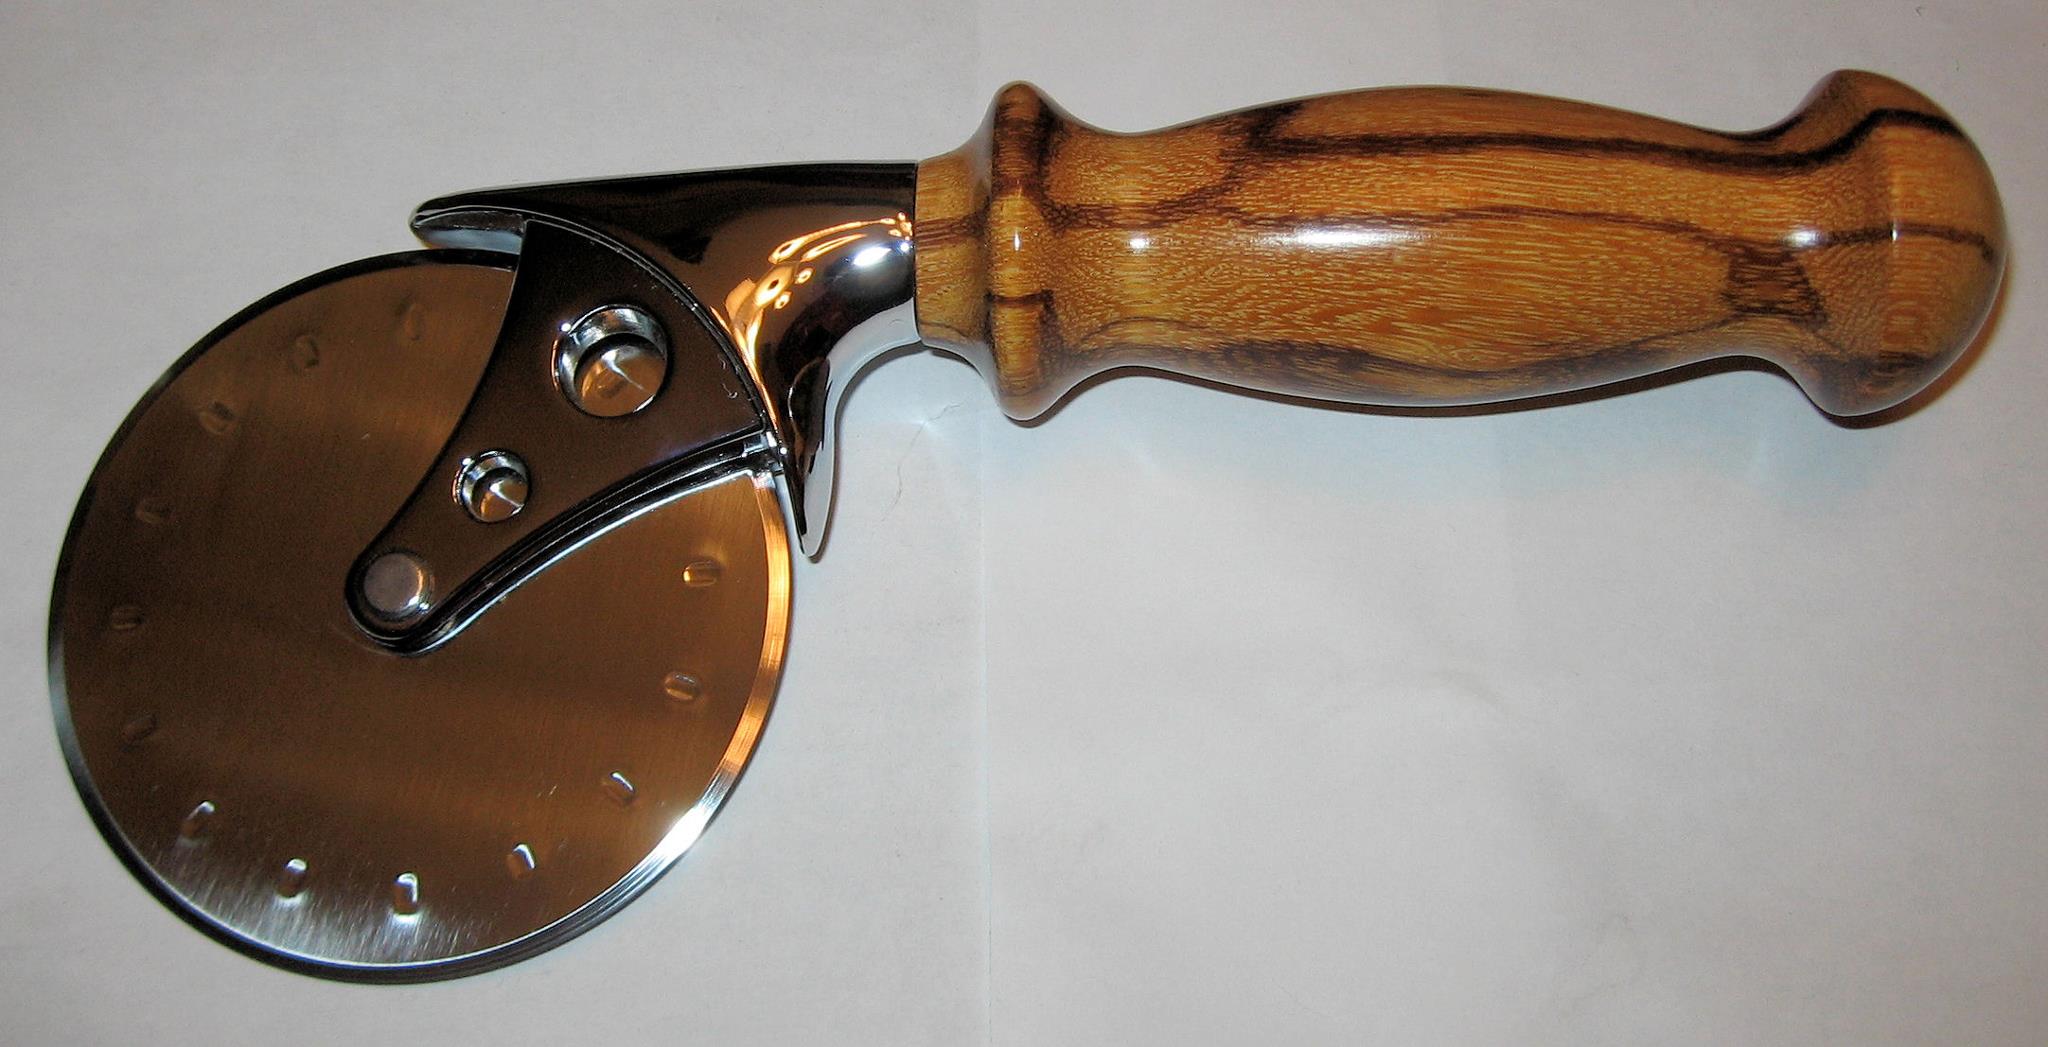 Marblewood. Weighs 2 pounds. Home defense model.